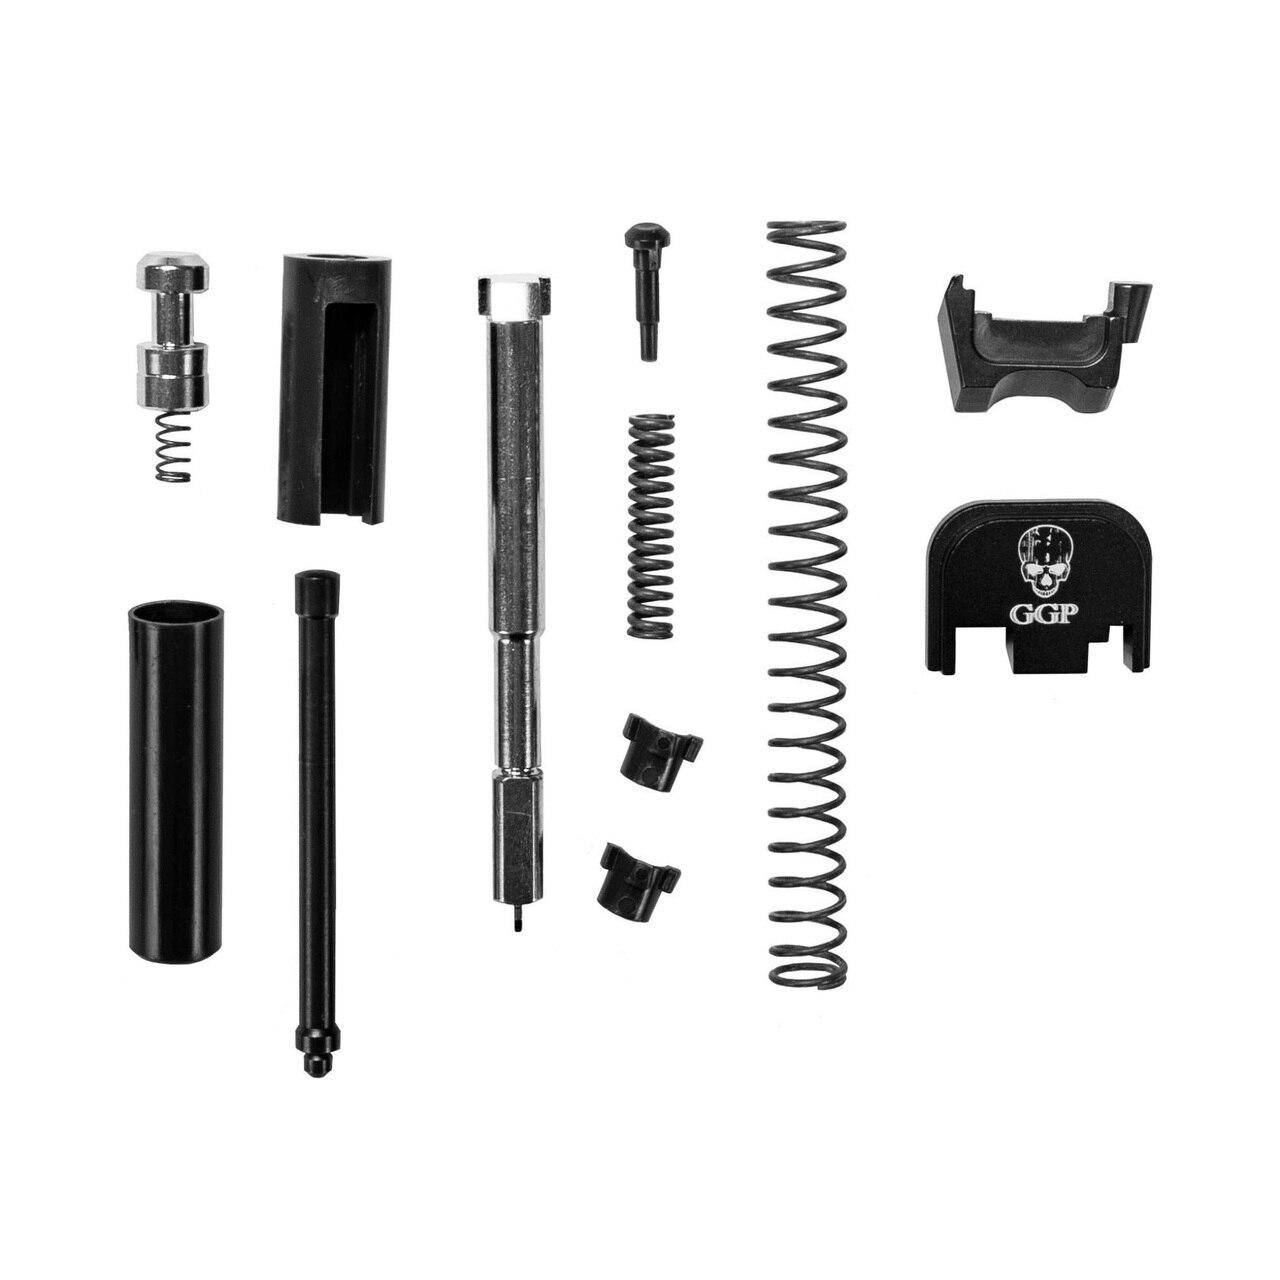 Grey Ghost Precision Ggp Slide Completion Kit W/o Recoil 856054008604